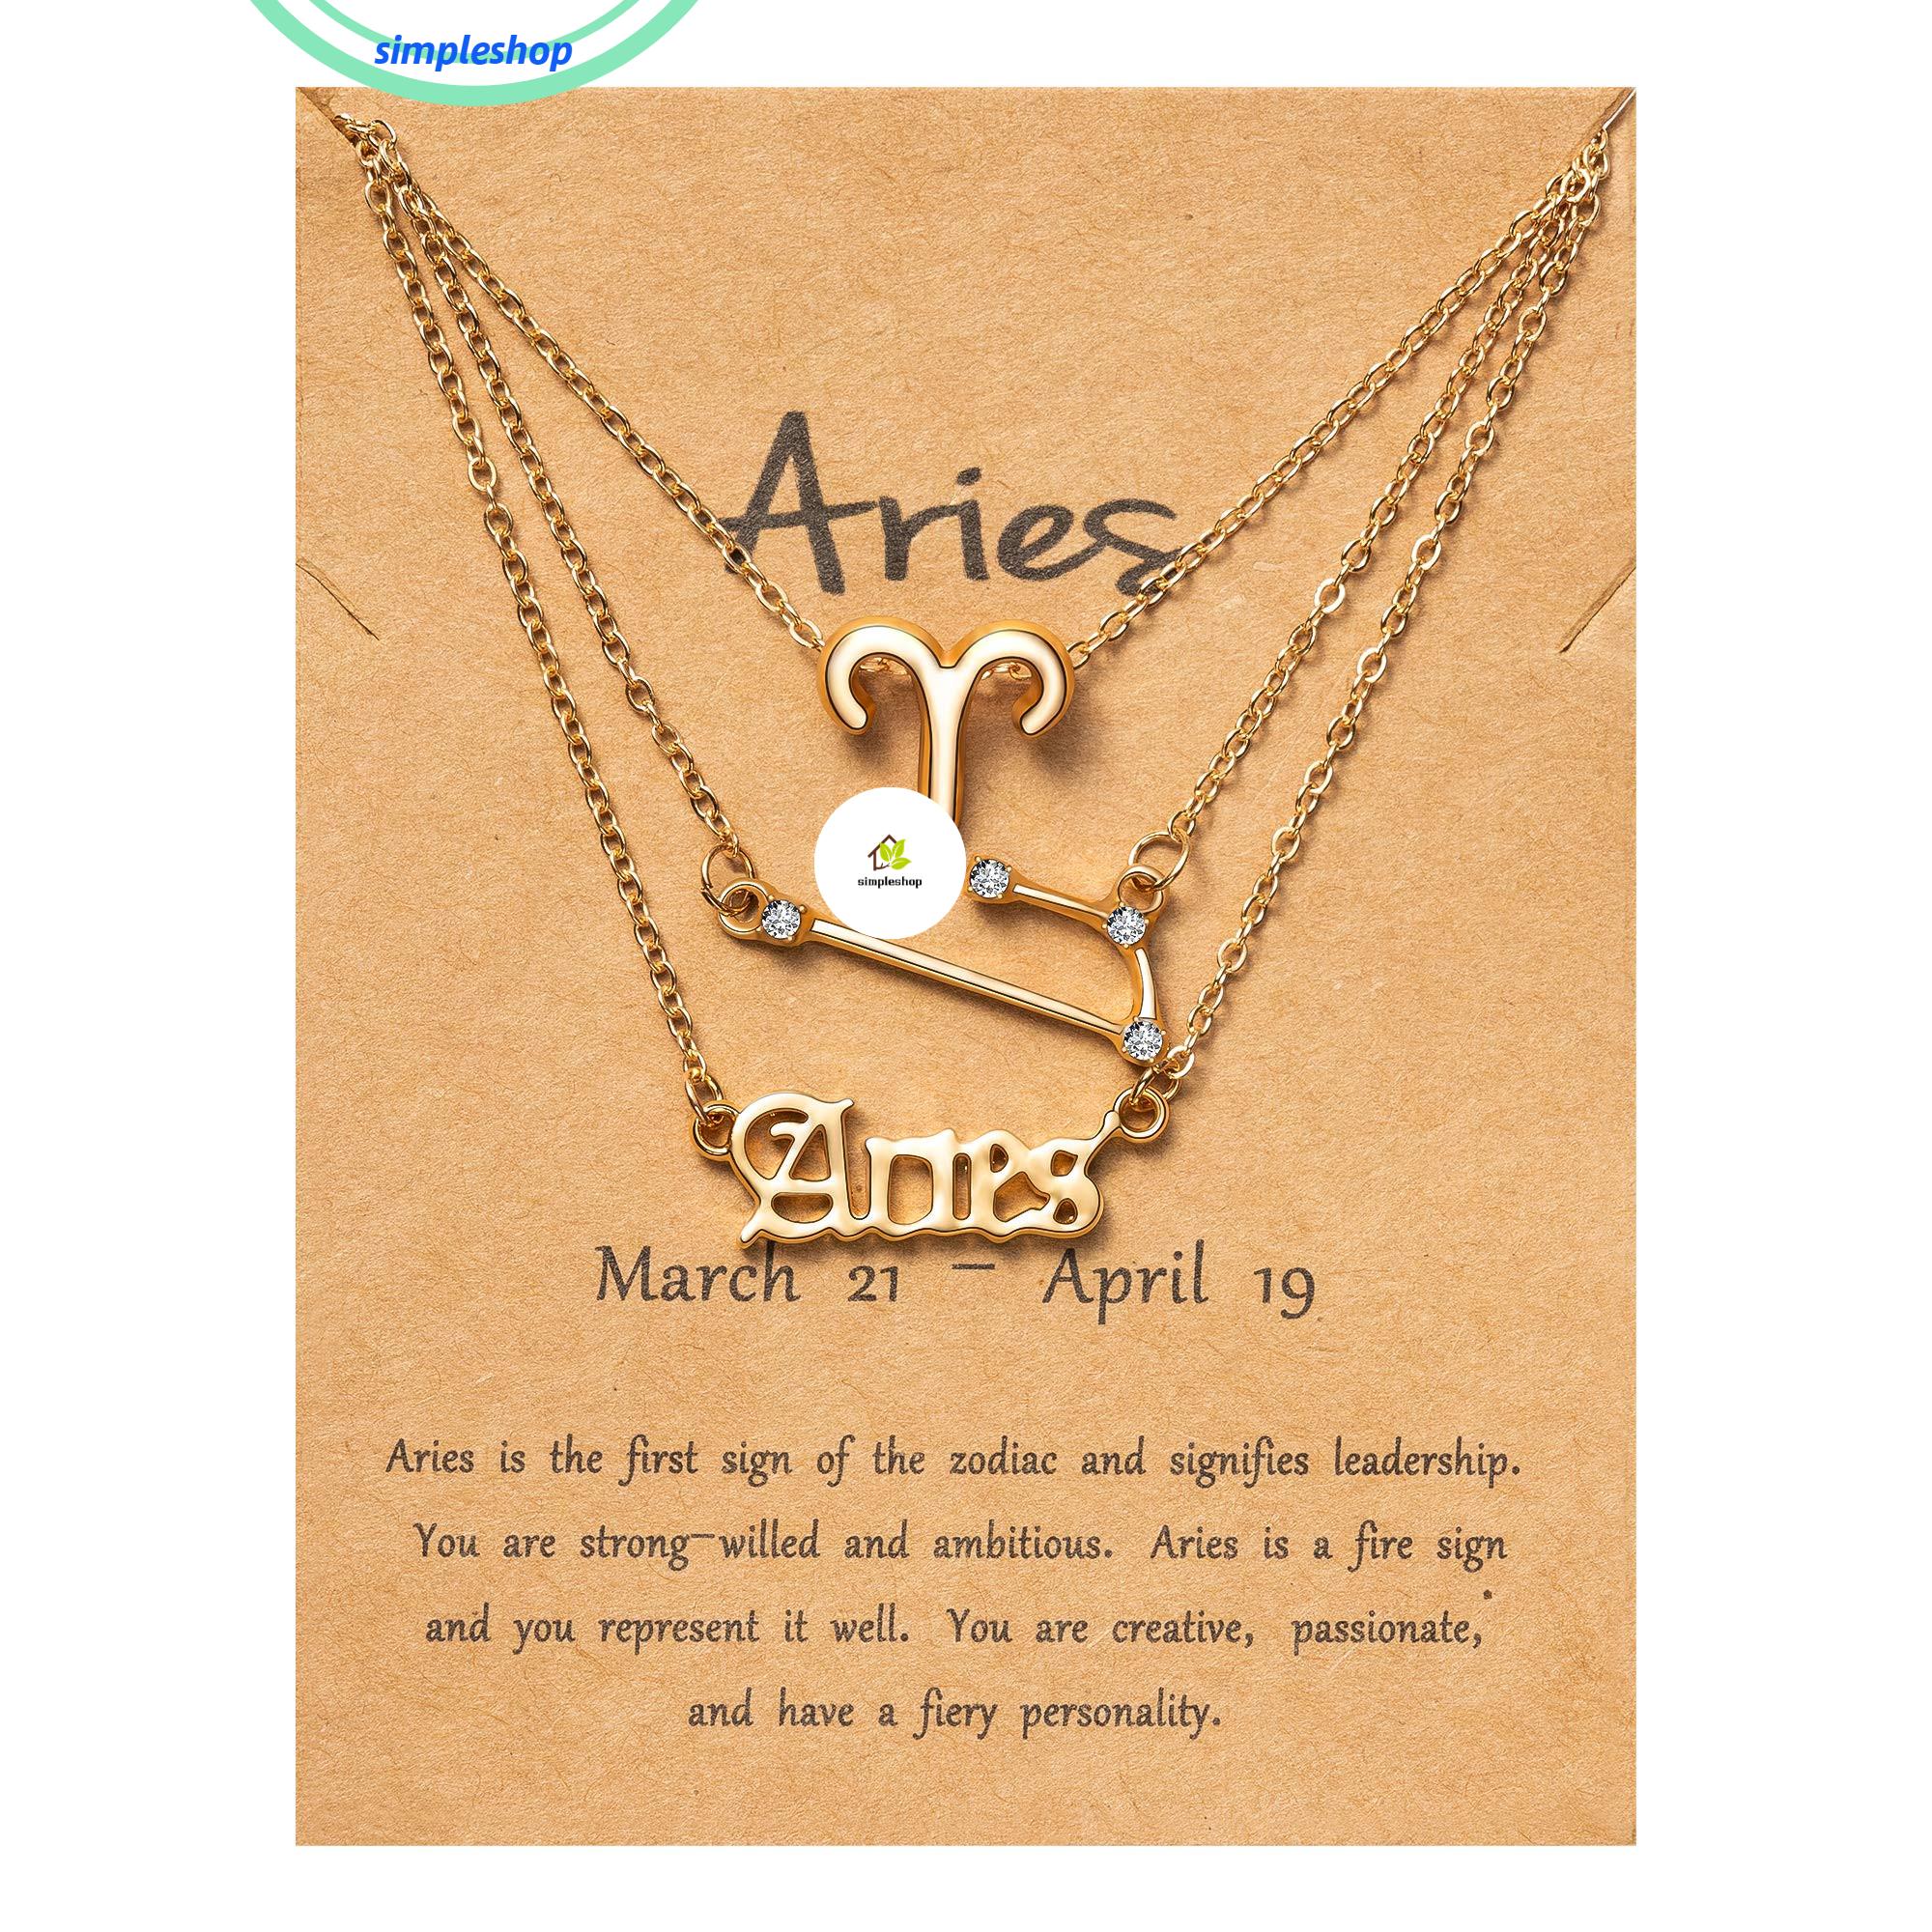 3pcs Zodiac Necklaces 12 Constellation Pendant Necklace Astrology Horoscope Old English Zodiac Sign Necklace Jewelry with Message Card for Women Girls Jewelry